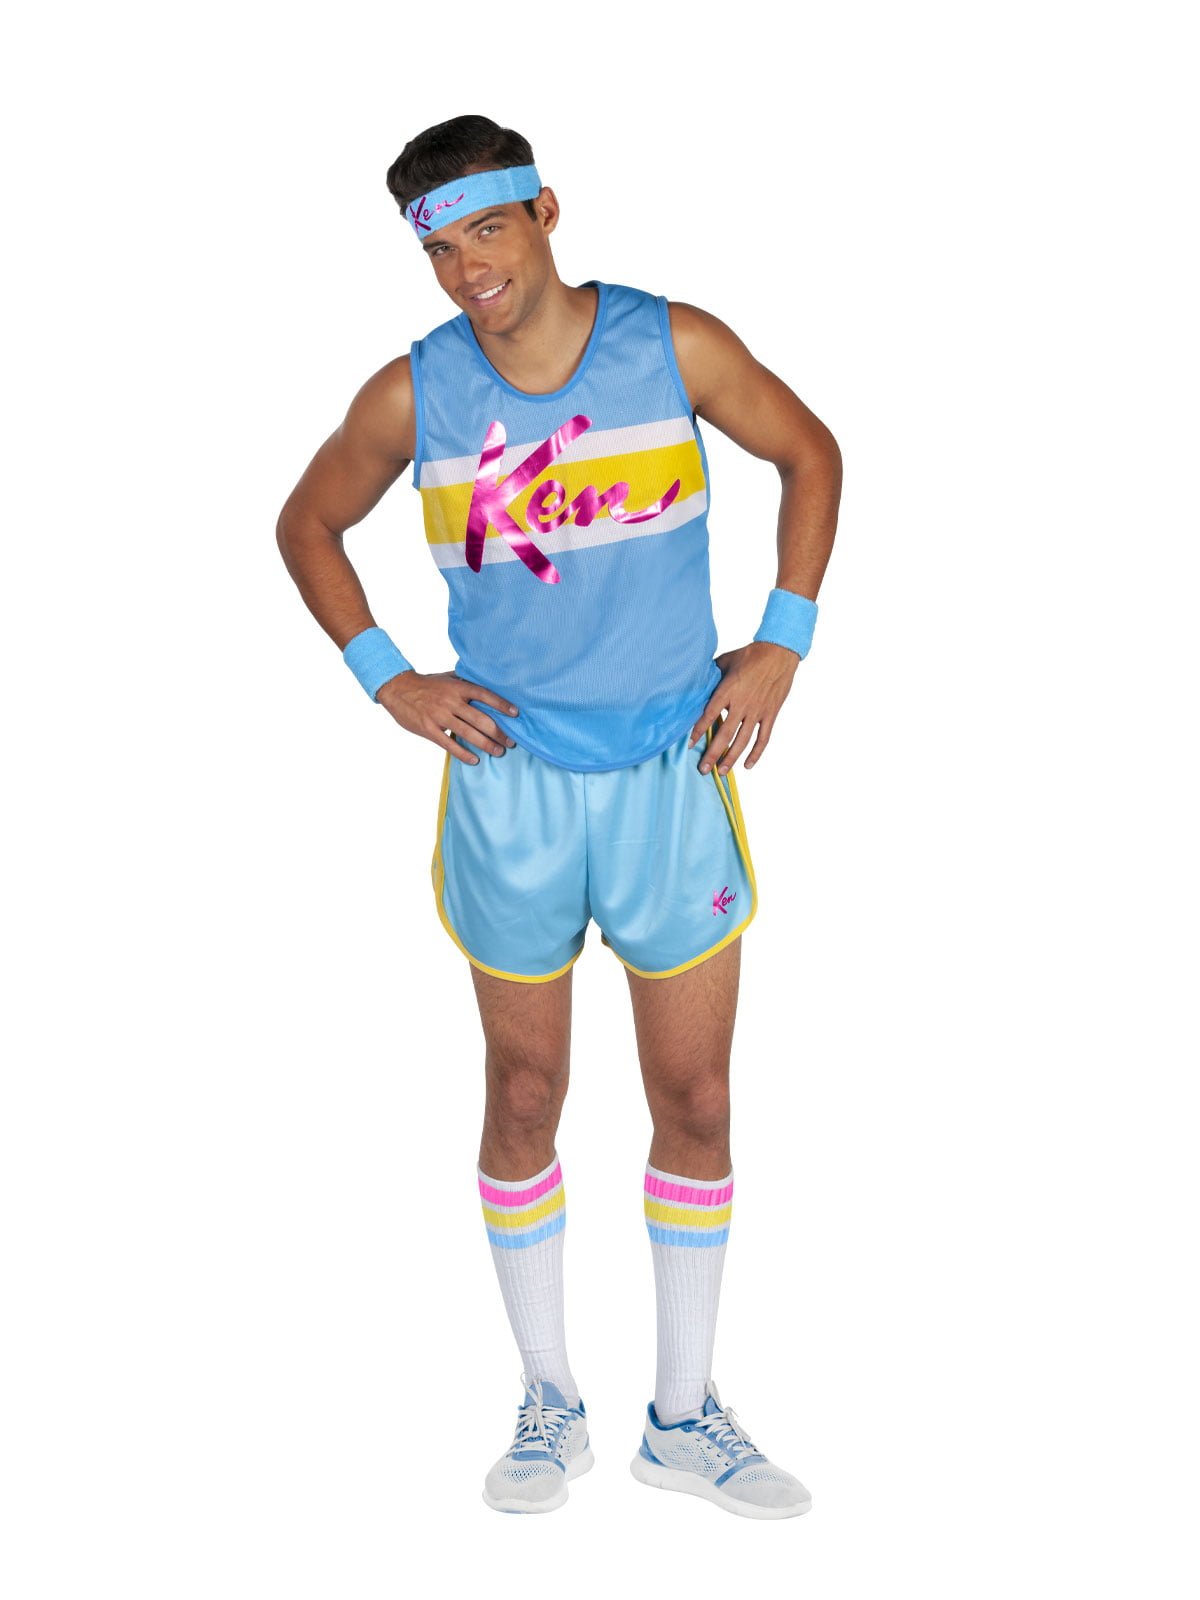 Featured image for “Barbie Ken Exercise Costume, Adult”